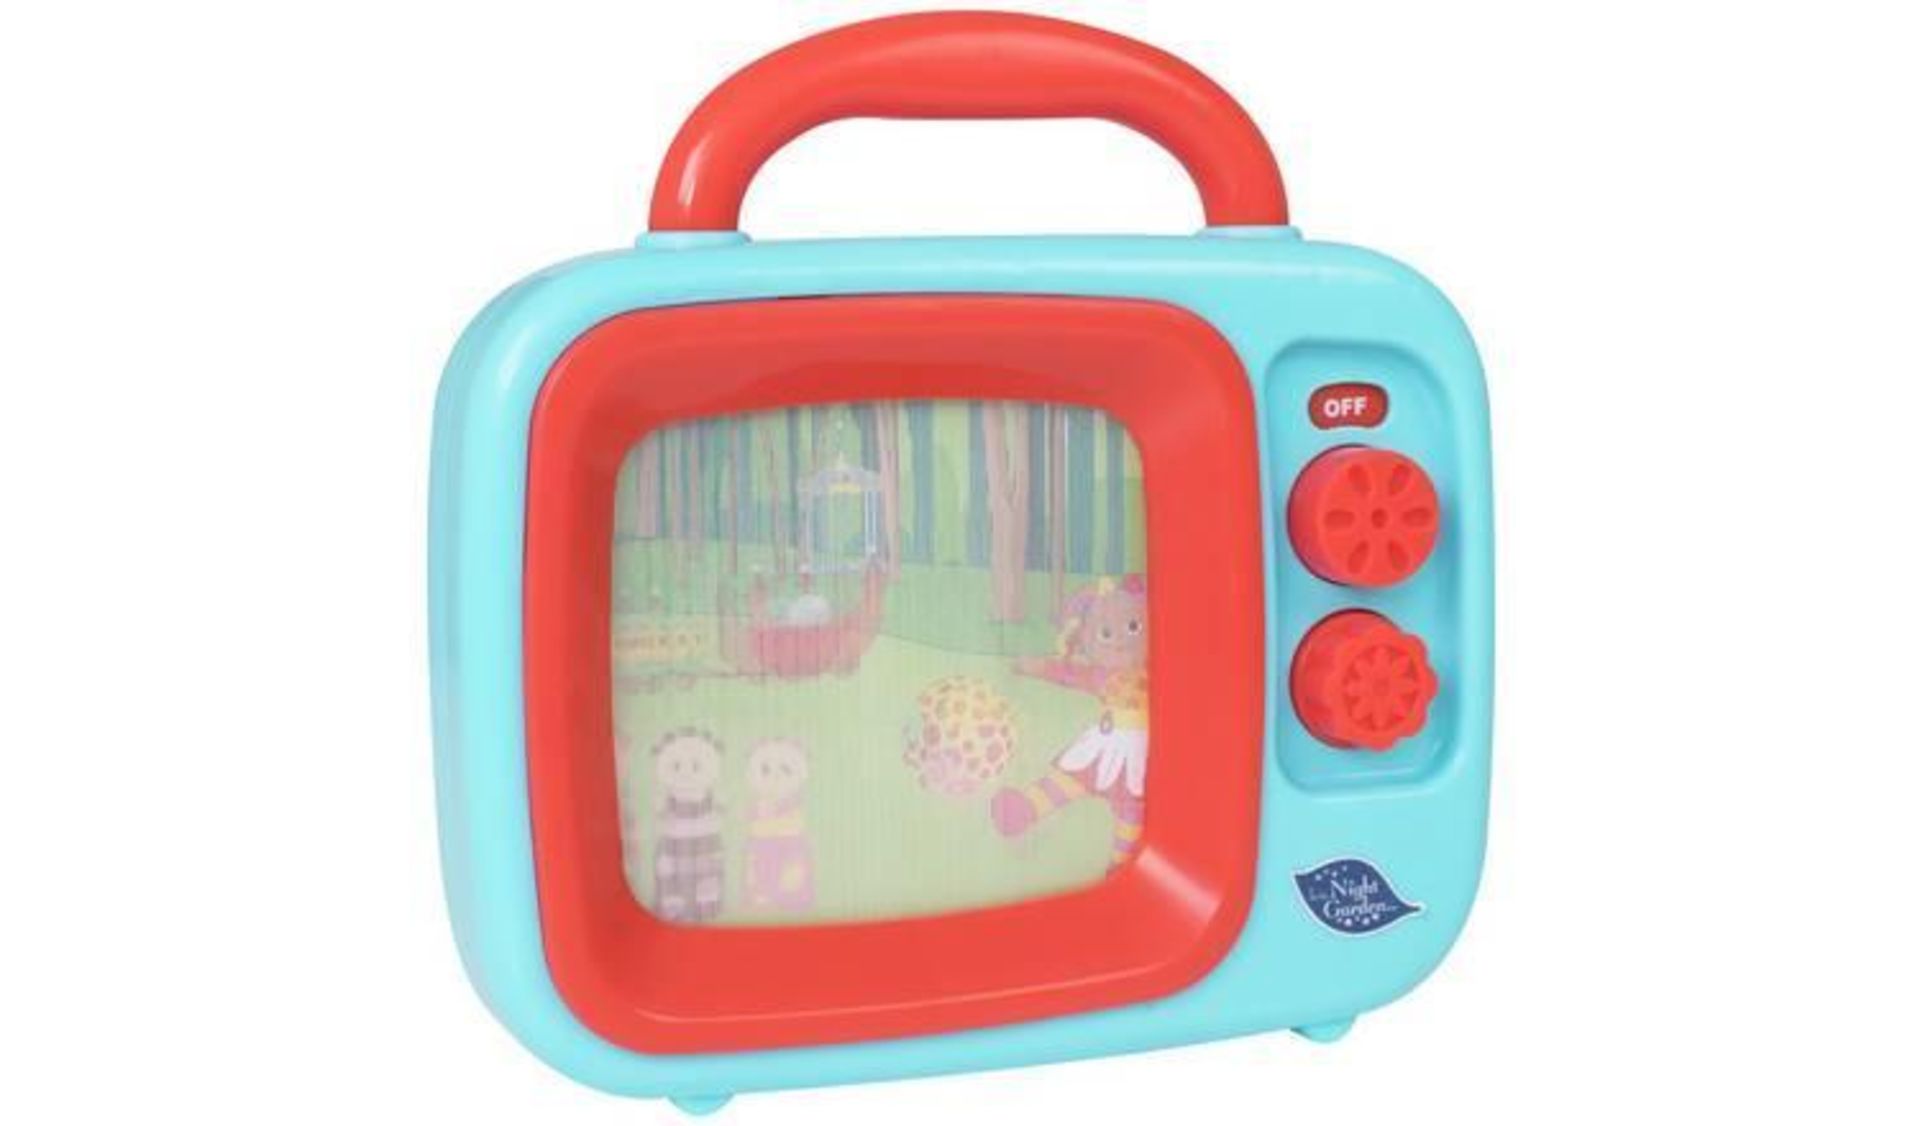 In the Night Garden My First TV 858/5204 £11.00 RRP